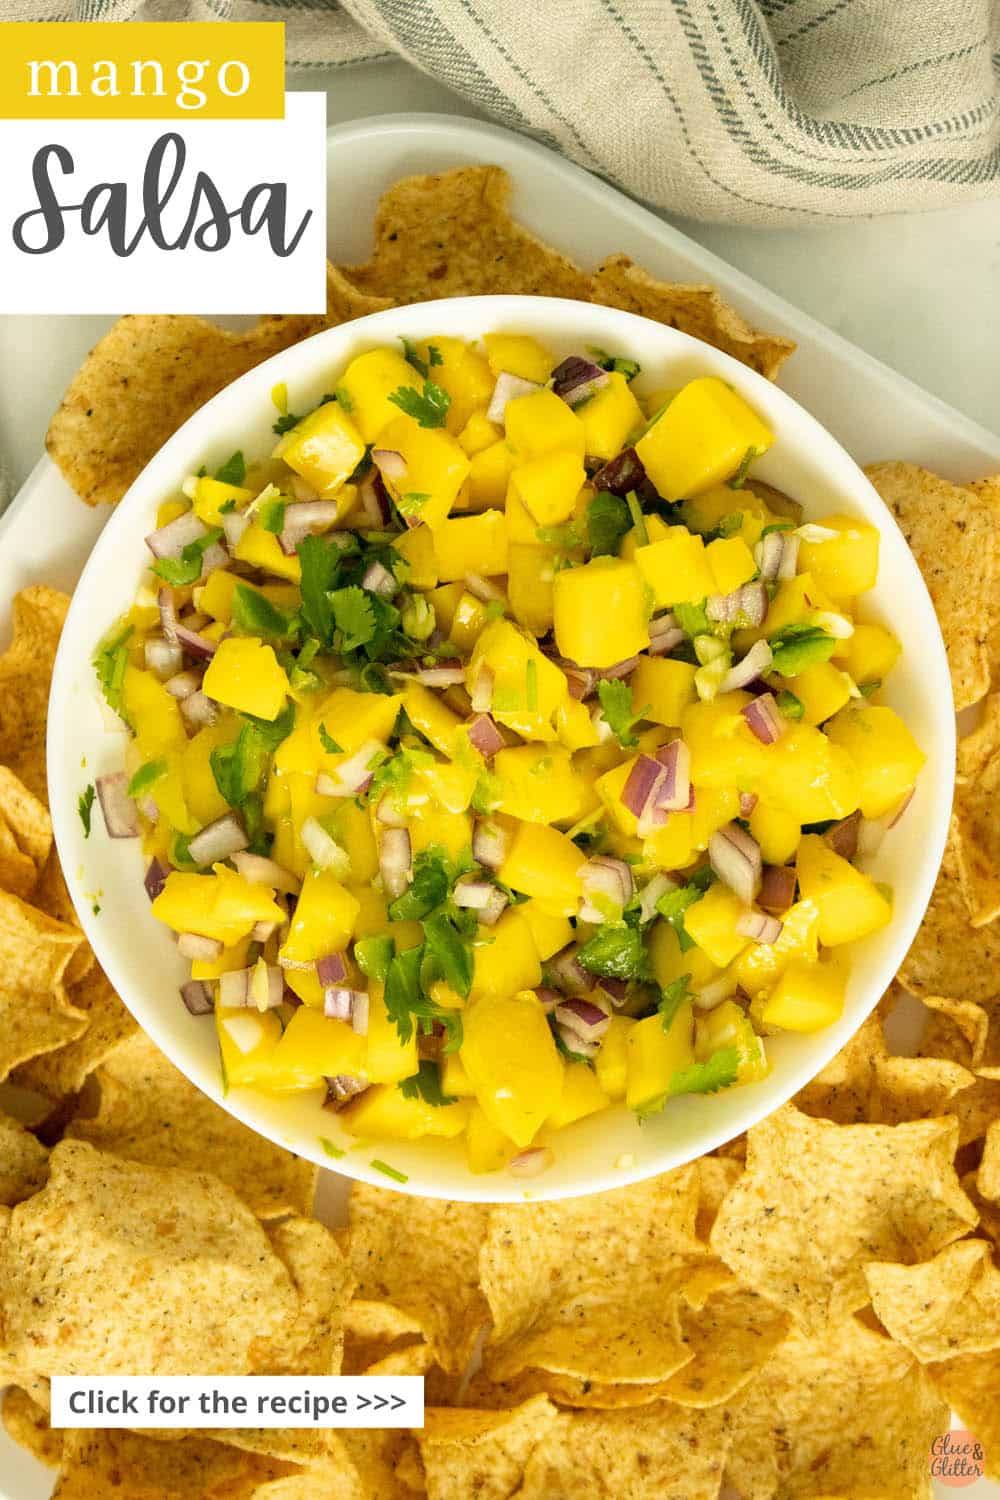 tray of chips with a bowl of mango salsa, text overlay